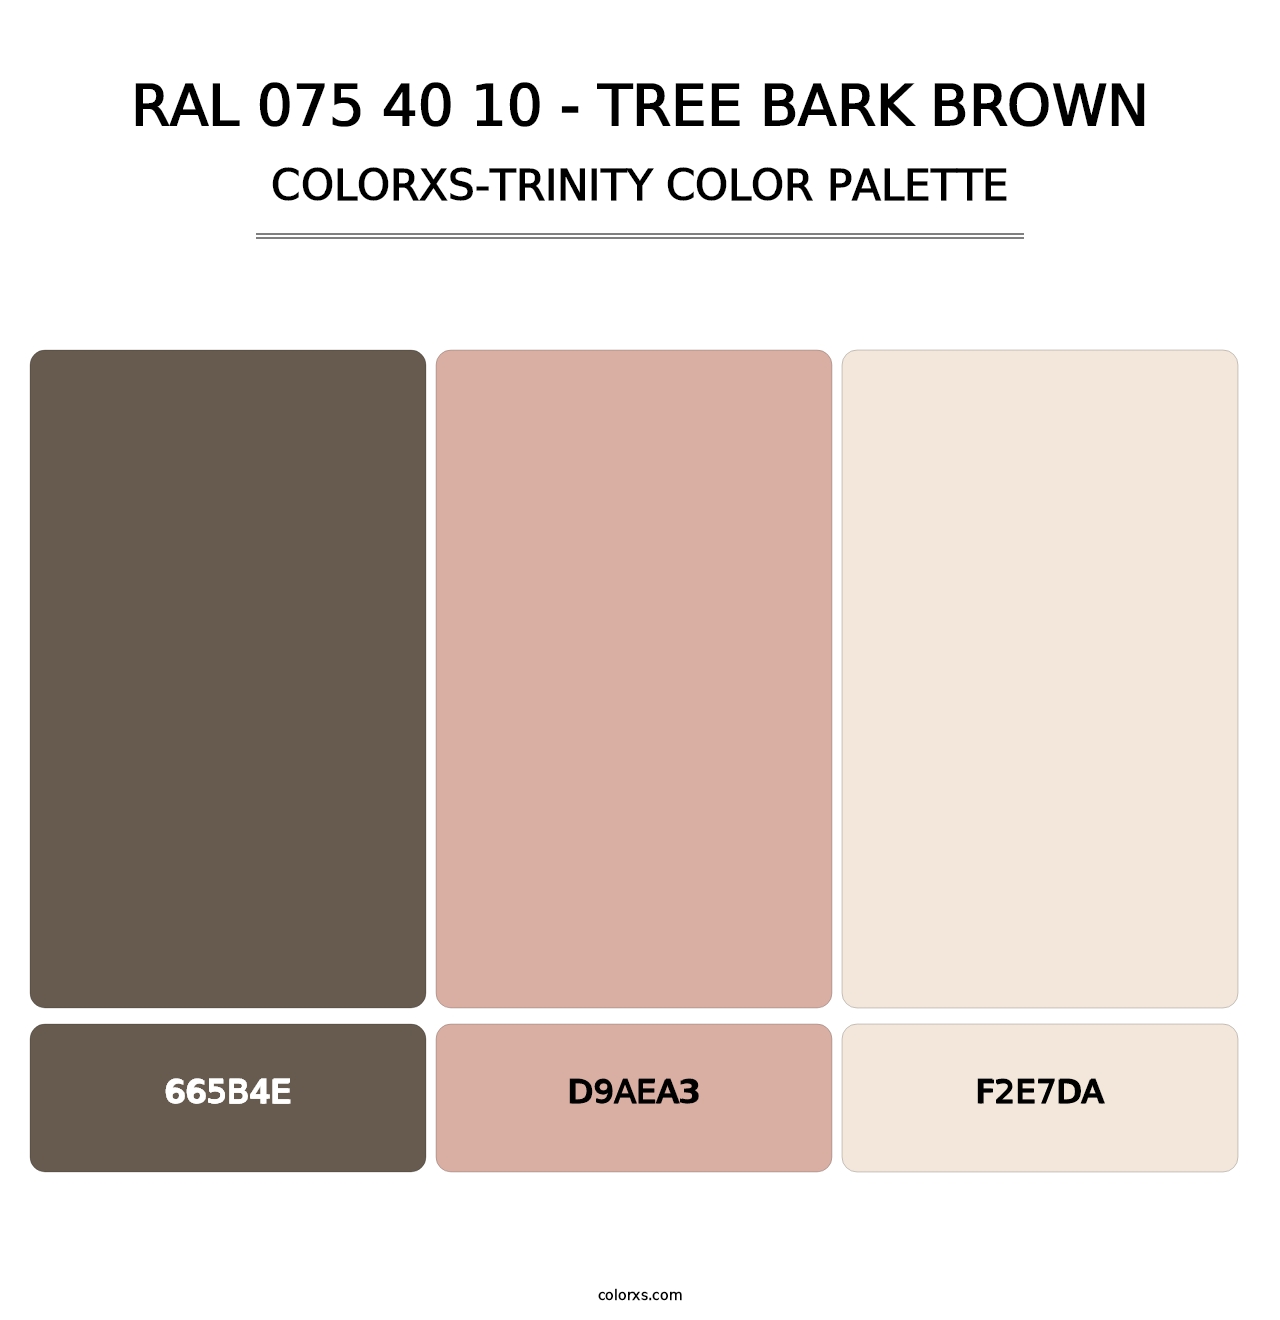 RAL 075 40 10 - Tree Bark Brown - Colorxs Trinity Palette